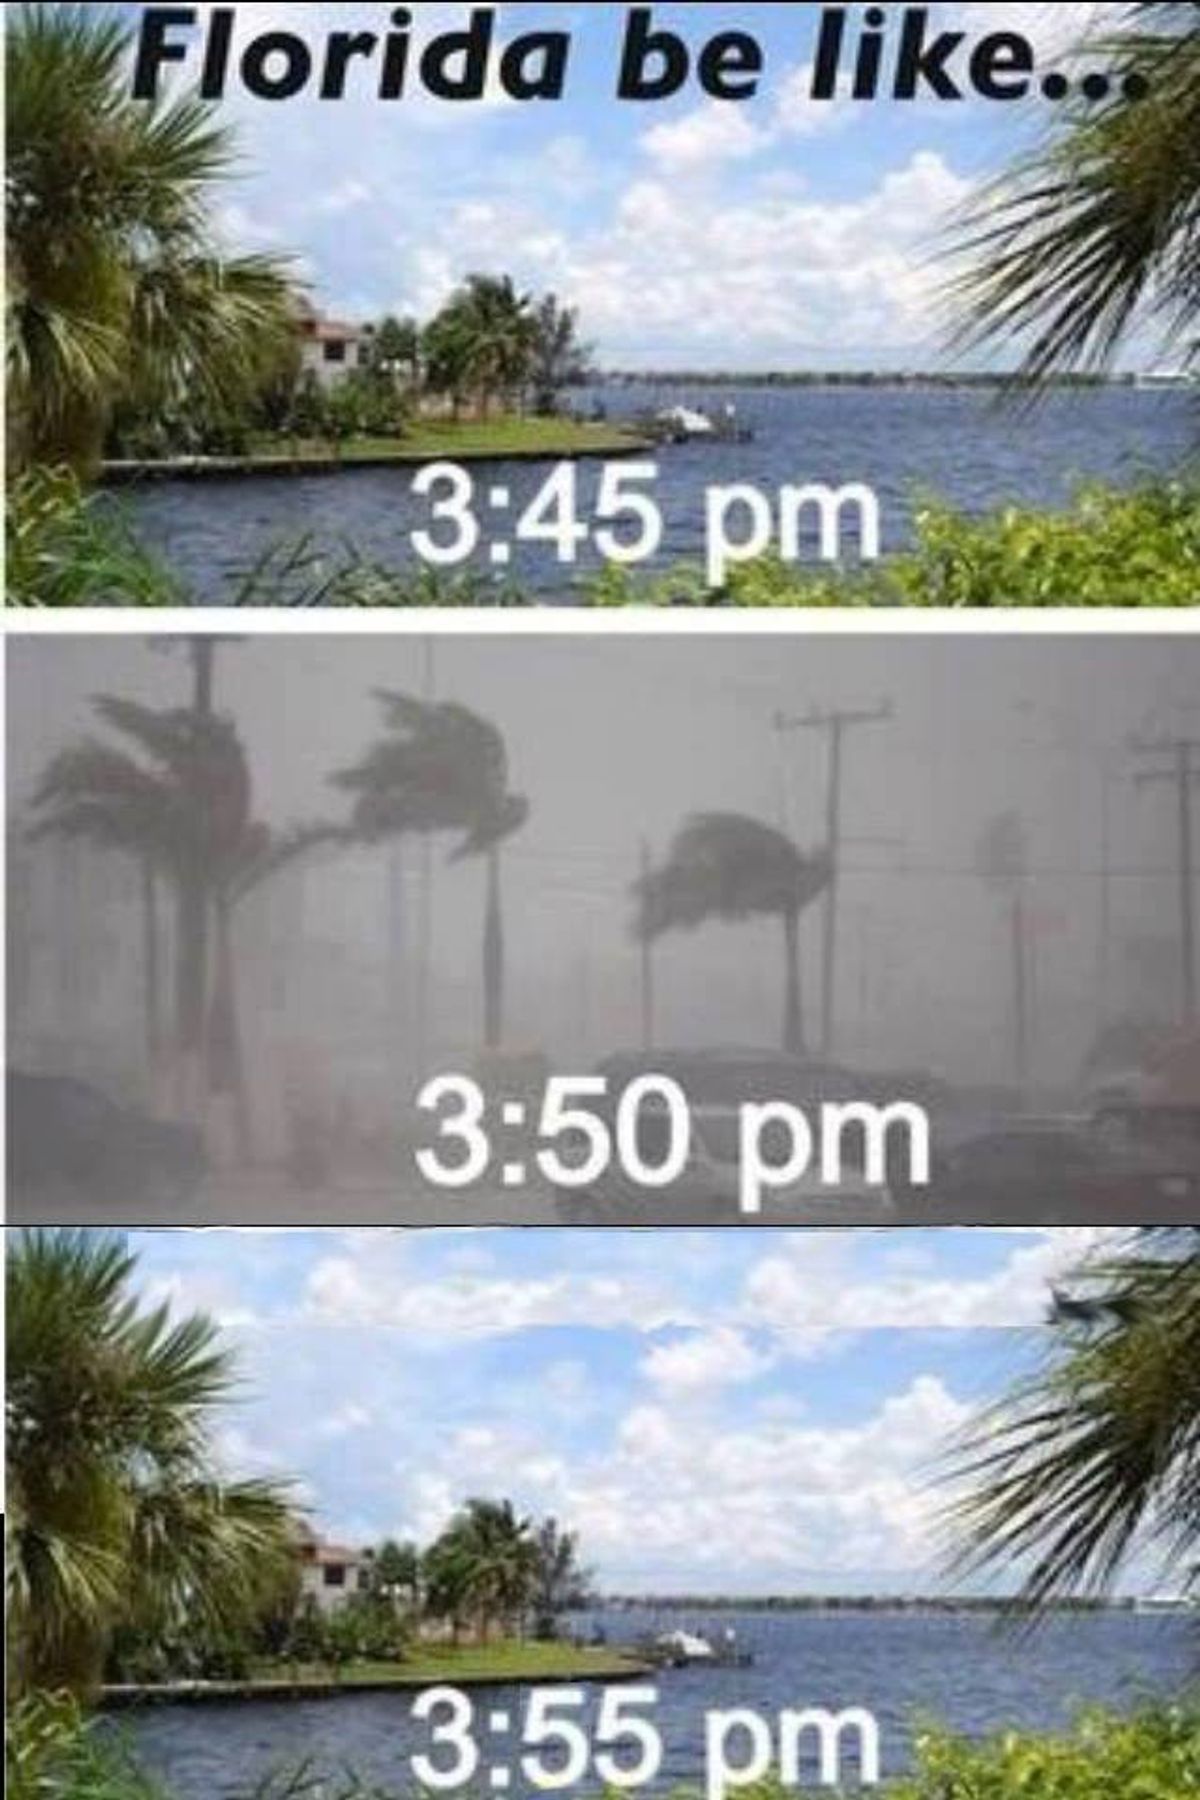 How To Be Prepared For Miami's Bipolar Weather